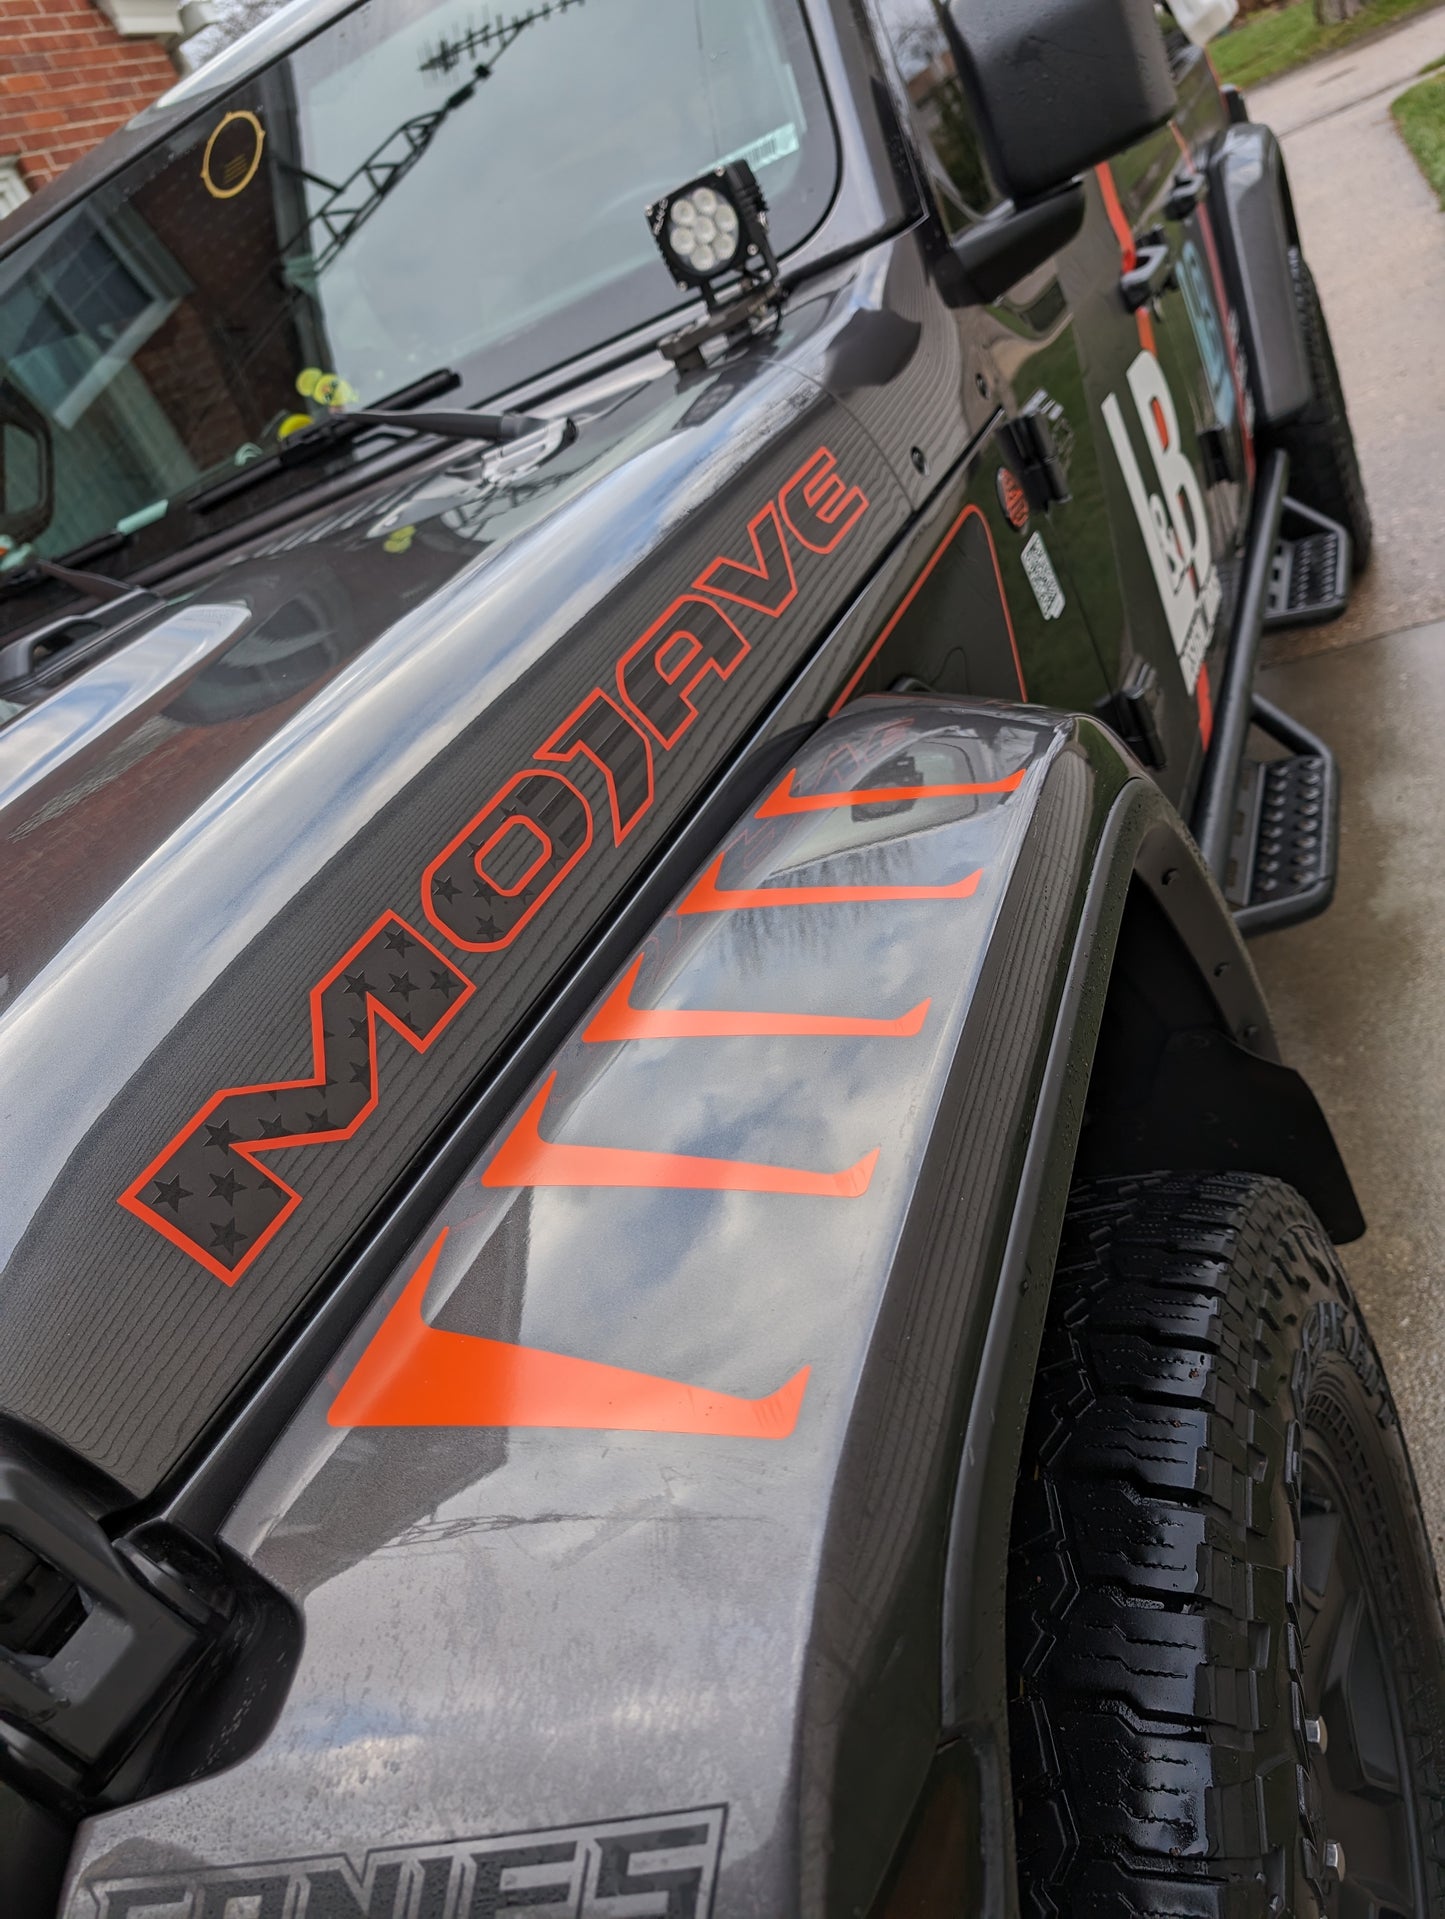 Fender Top Louver Slash Decal Set-Pair- fits JL, JK Wrangler and 2020 and newer Jeep Gladiator and More